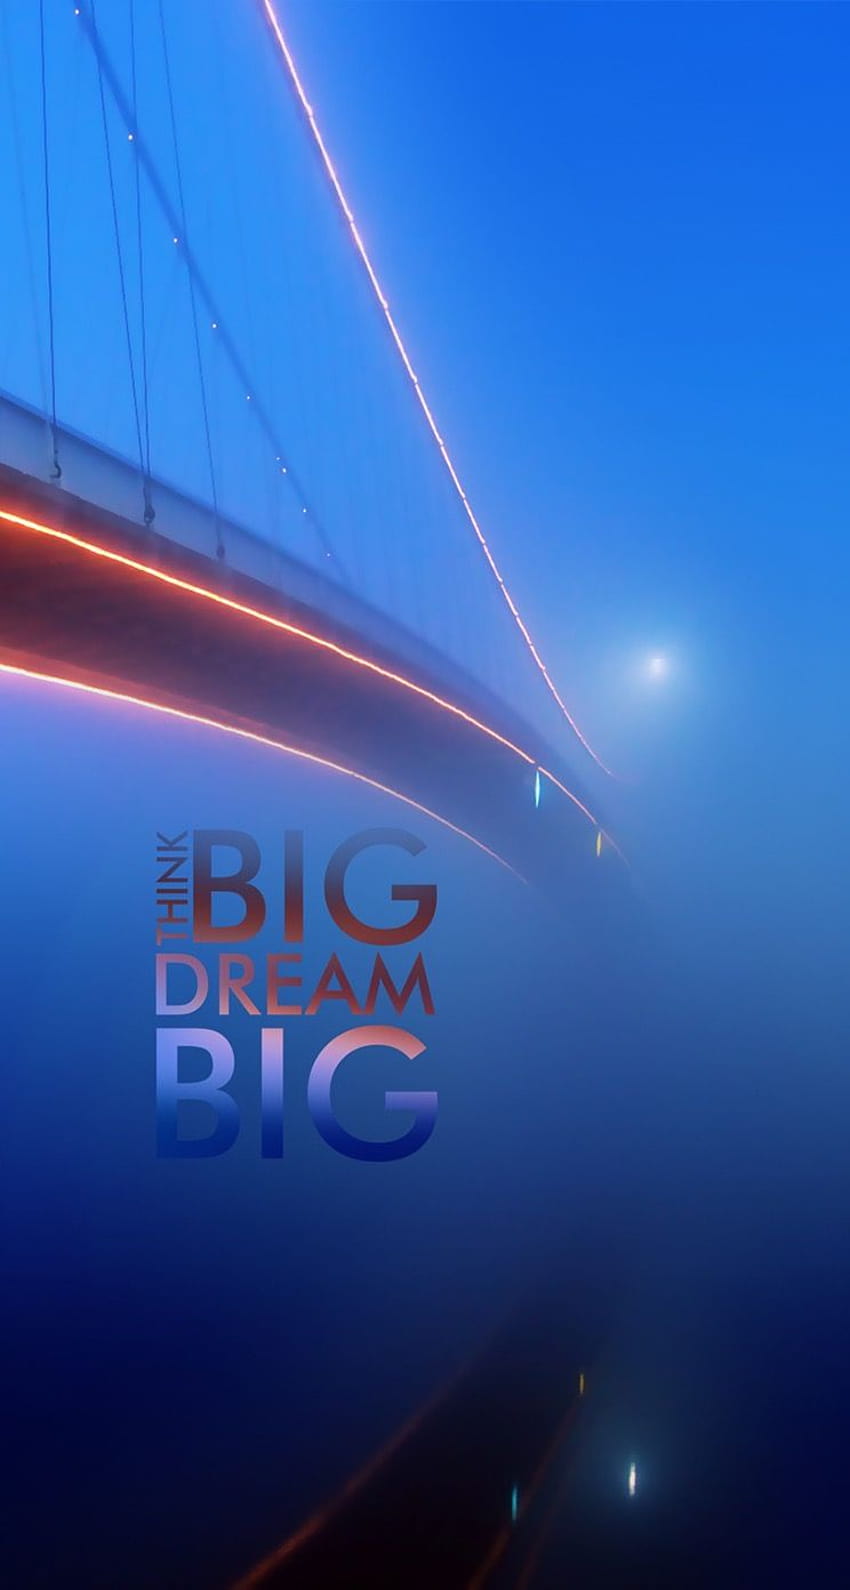 TAP AND GET THE APP! Quotes City Blue Bridge Mist Shining Bright Think Big Dream iPhone 5 HD phone wallpaper